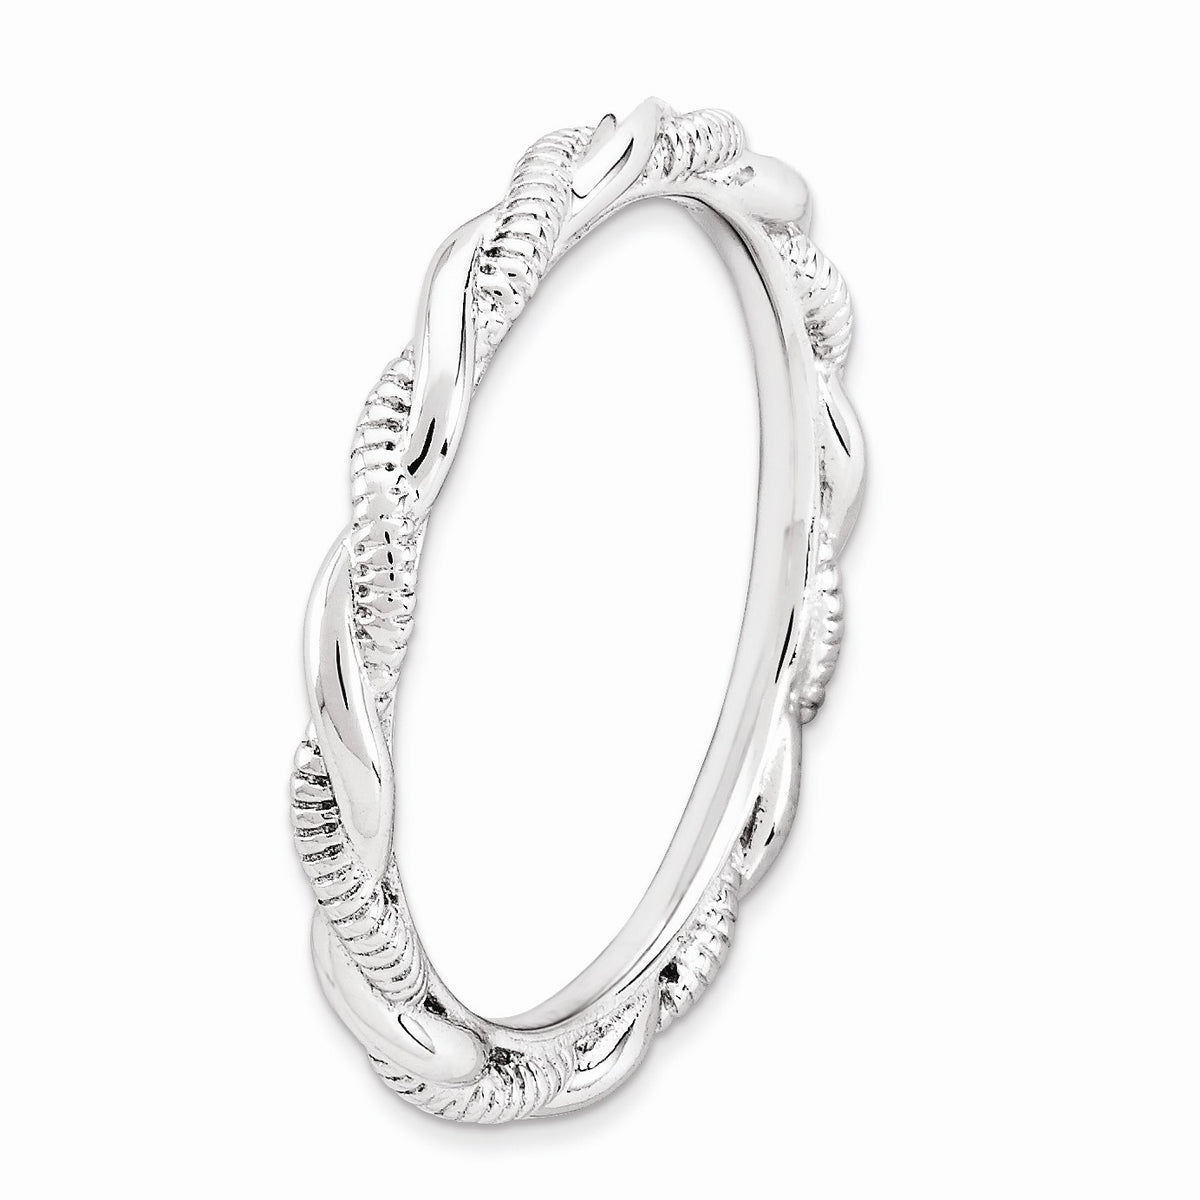 Alternate view of the 2.5mm Rhodium Plated Sterling Silver Stackable Twisted Band by The Black Bow Jewelry Co.